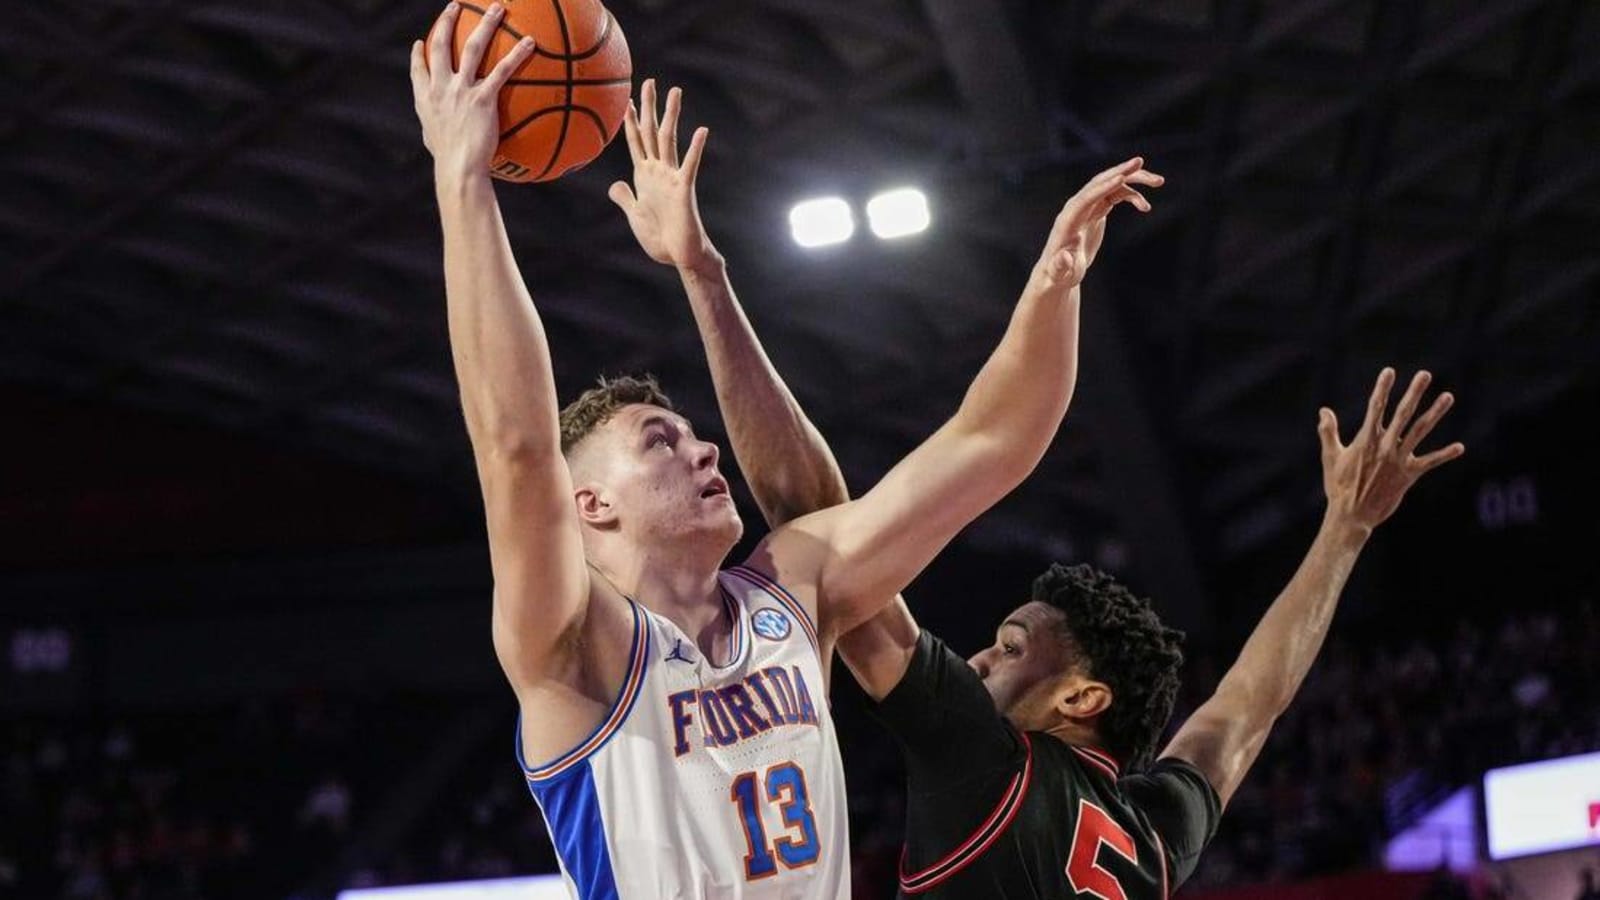 Will Richard paces Florida with 24 points in win at Georgia